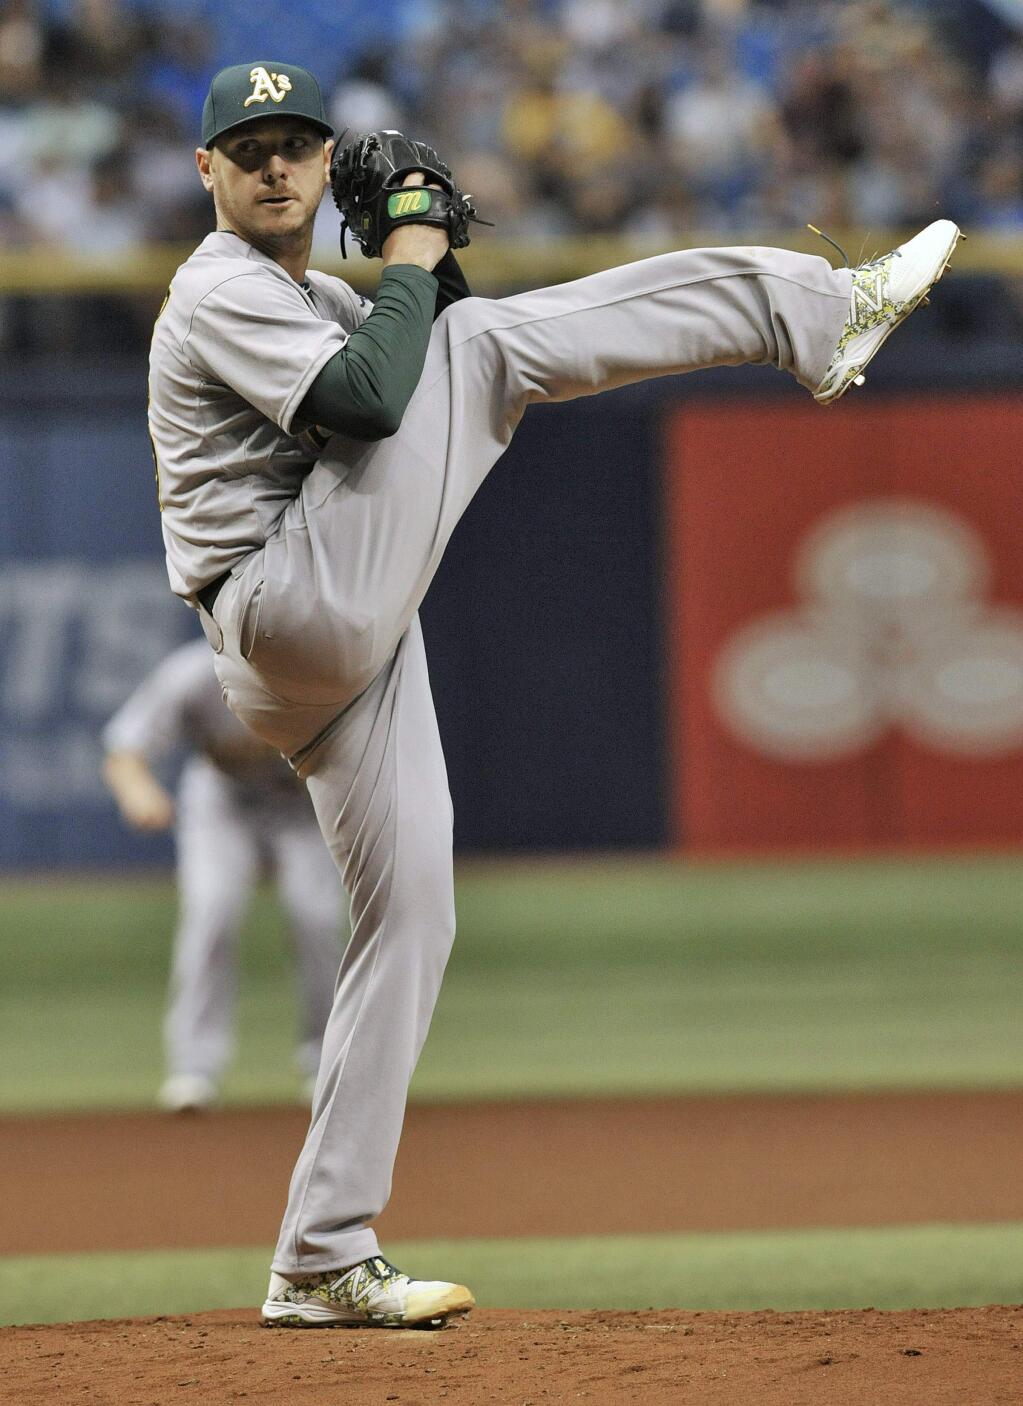 Oakland Athletics starter Scott Kazmir pitches against the Tampa Bay Rays during the first inning of a baseball game Friday, May 22, 2015, in St. Petersburg, Fla. (AP Photo/Steve Nesius)